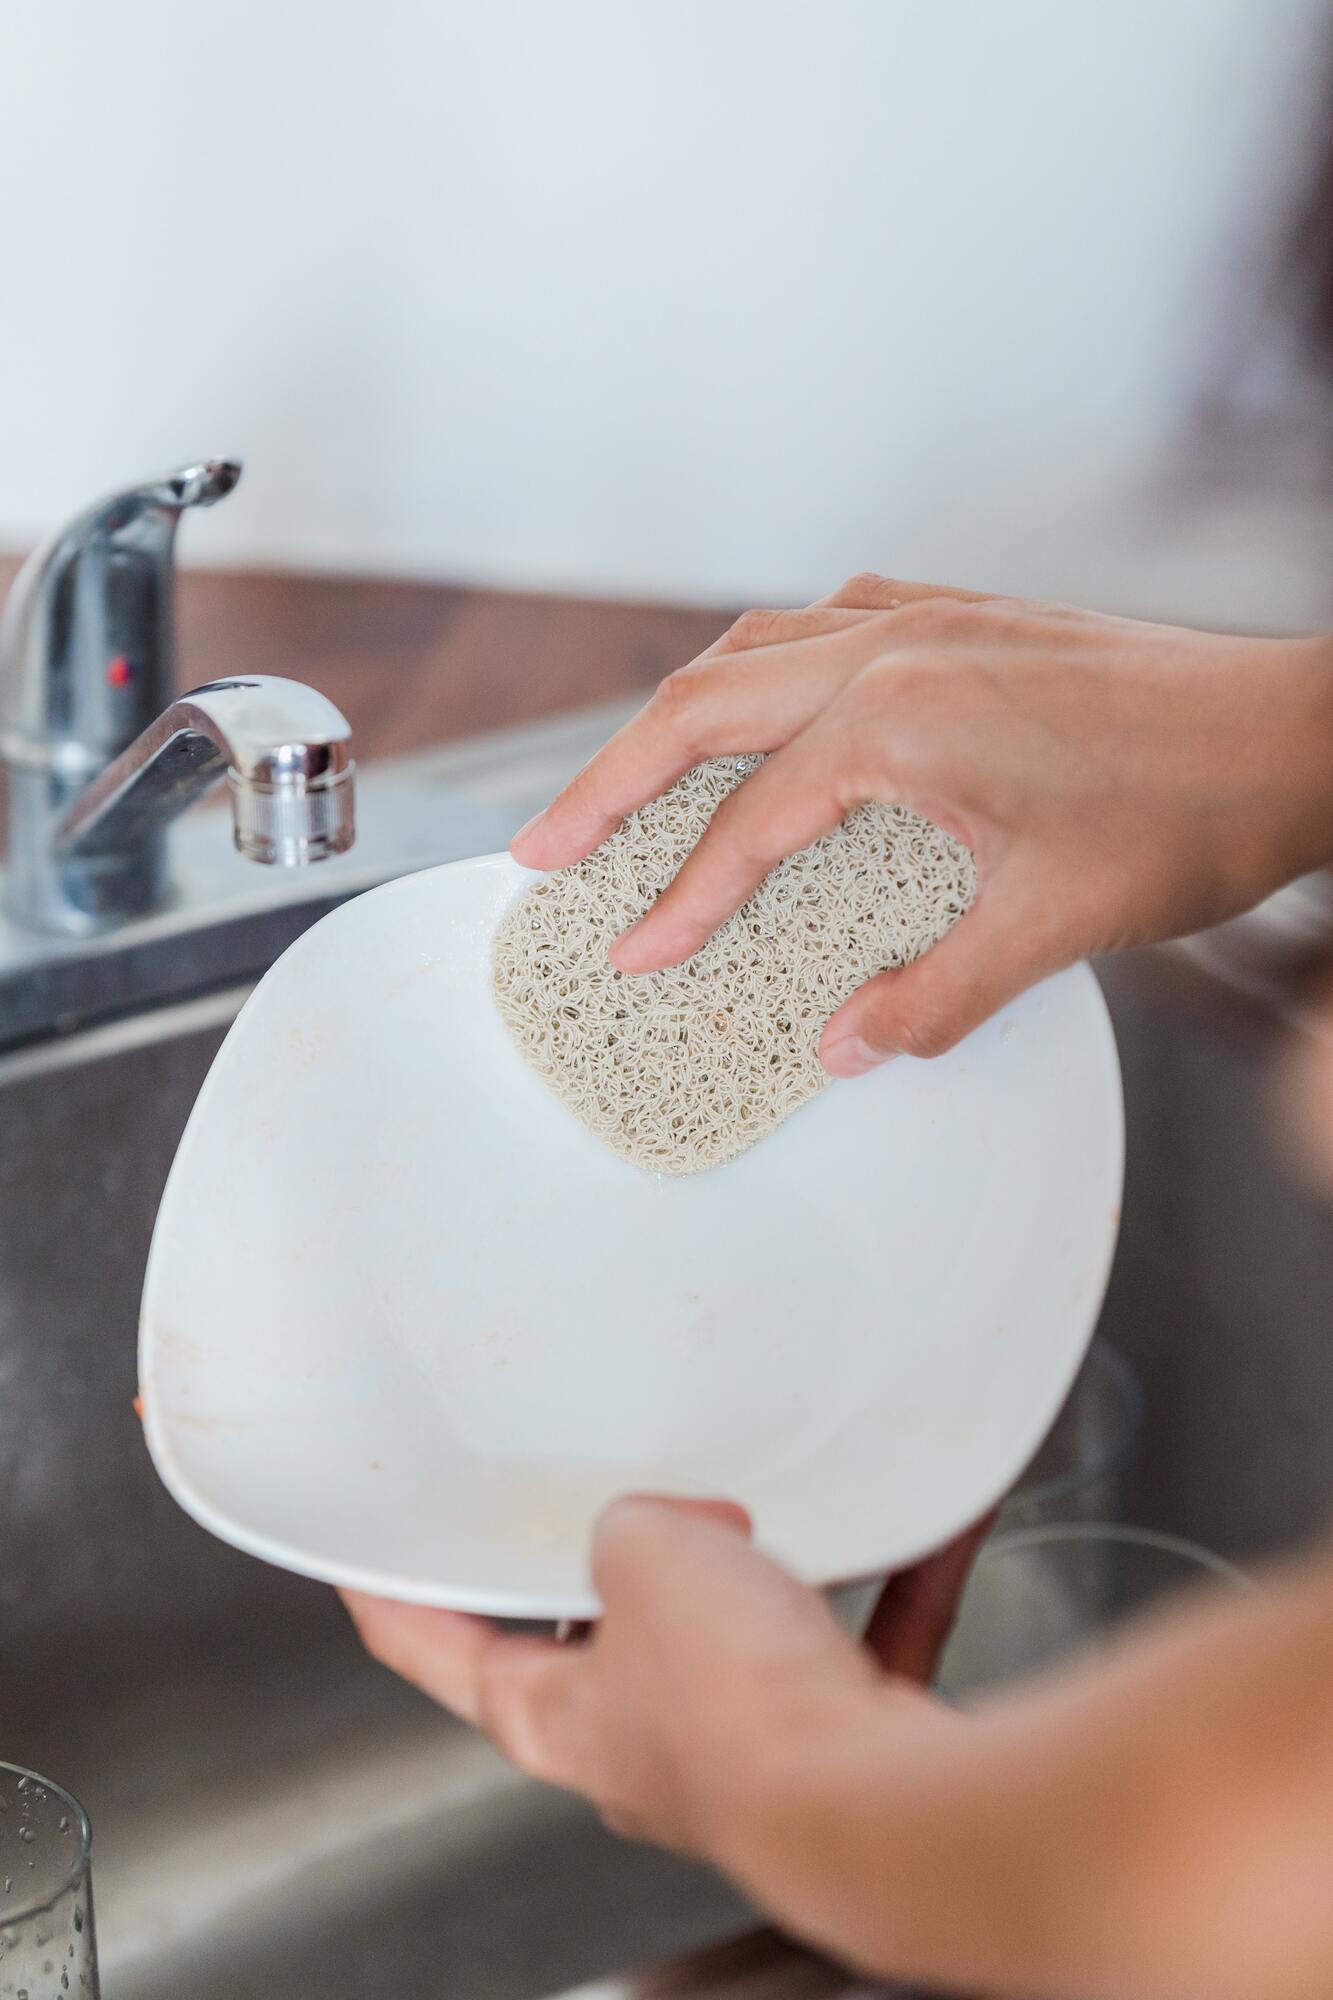 How to wash dishes without detergent